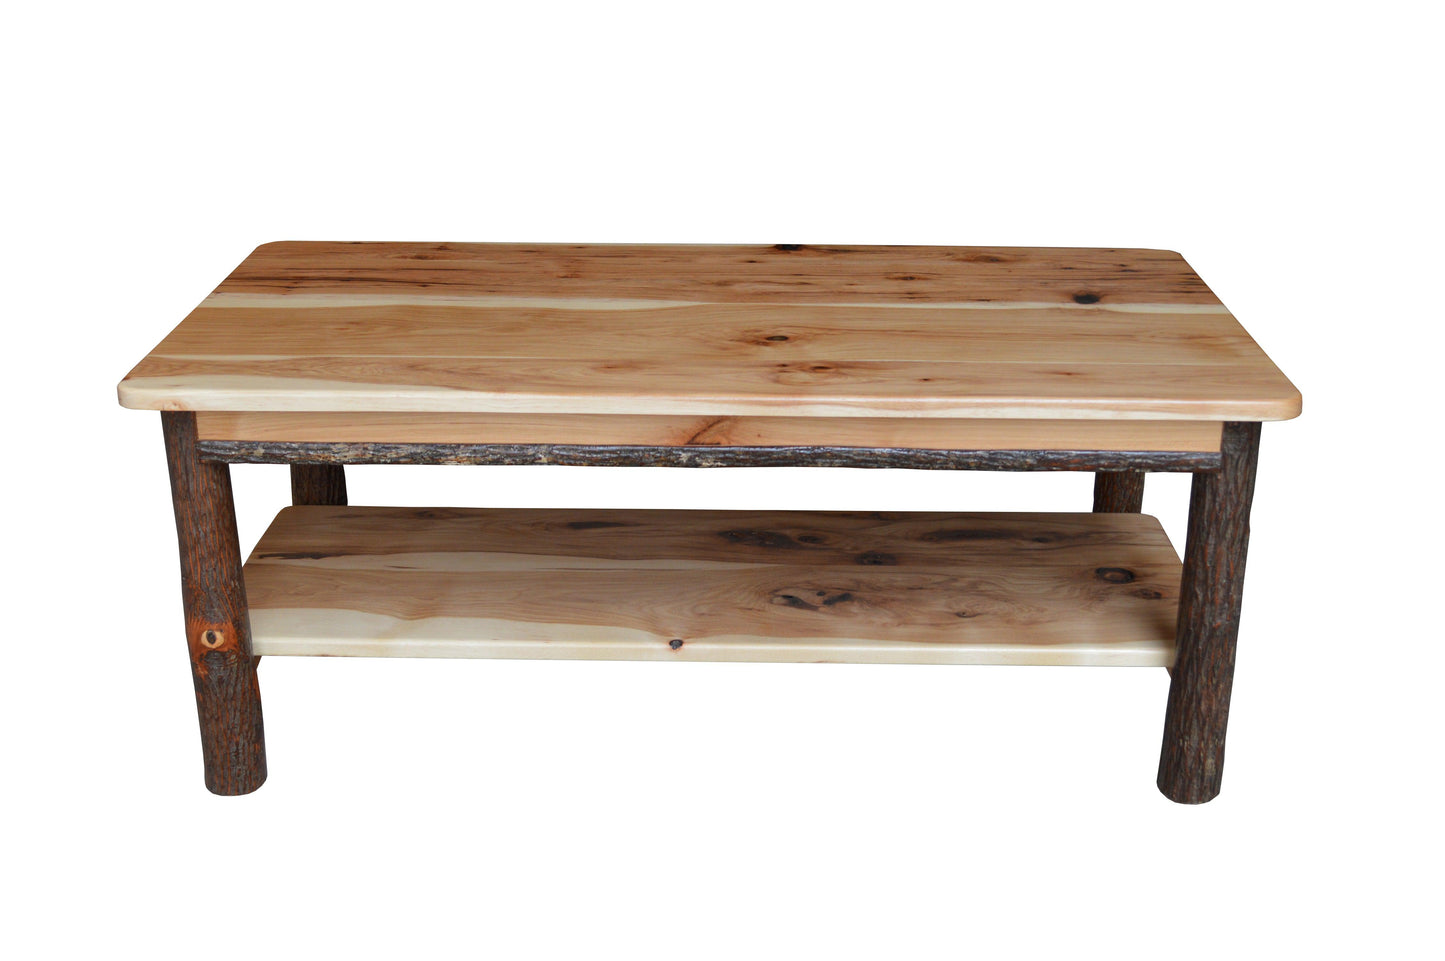 A&L Furniture Co. Hickory Solid Wood Coffee Table with Shelf - LEAD TIME TO SHIP 4 WEEKS OR LESS